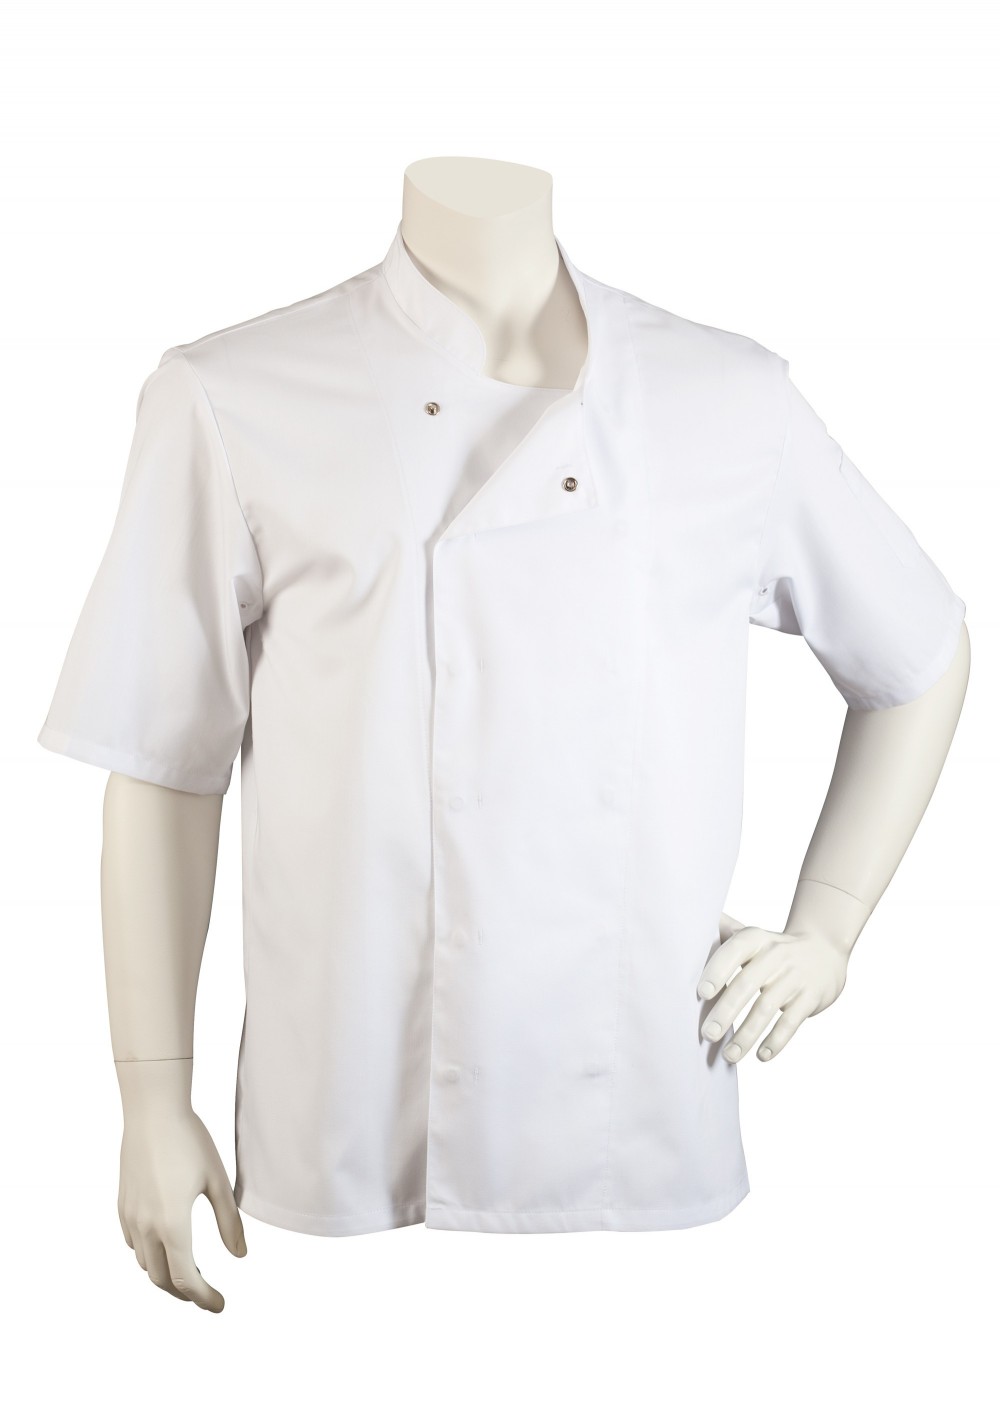 Mens Short Sleeve Chef Cooking Jacket in White Front